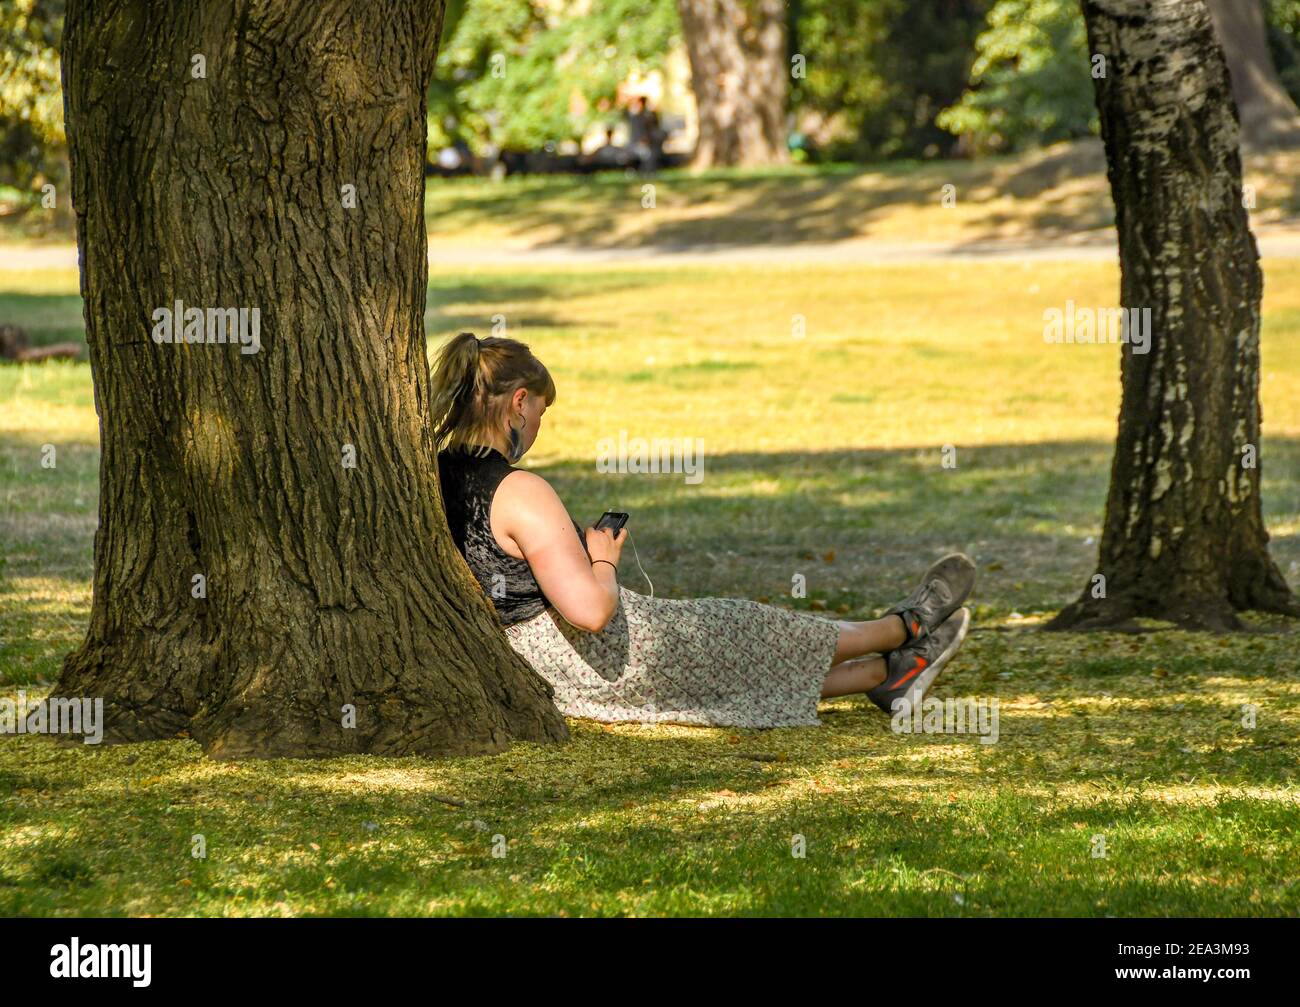 PRAGUE, CZECH REPUBLIC - JULY 2018: Person sitting down under the shade of a tree checking her phone in a public park in Prague. Stock Photo